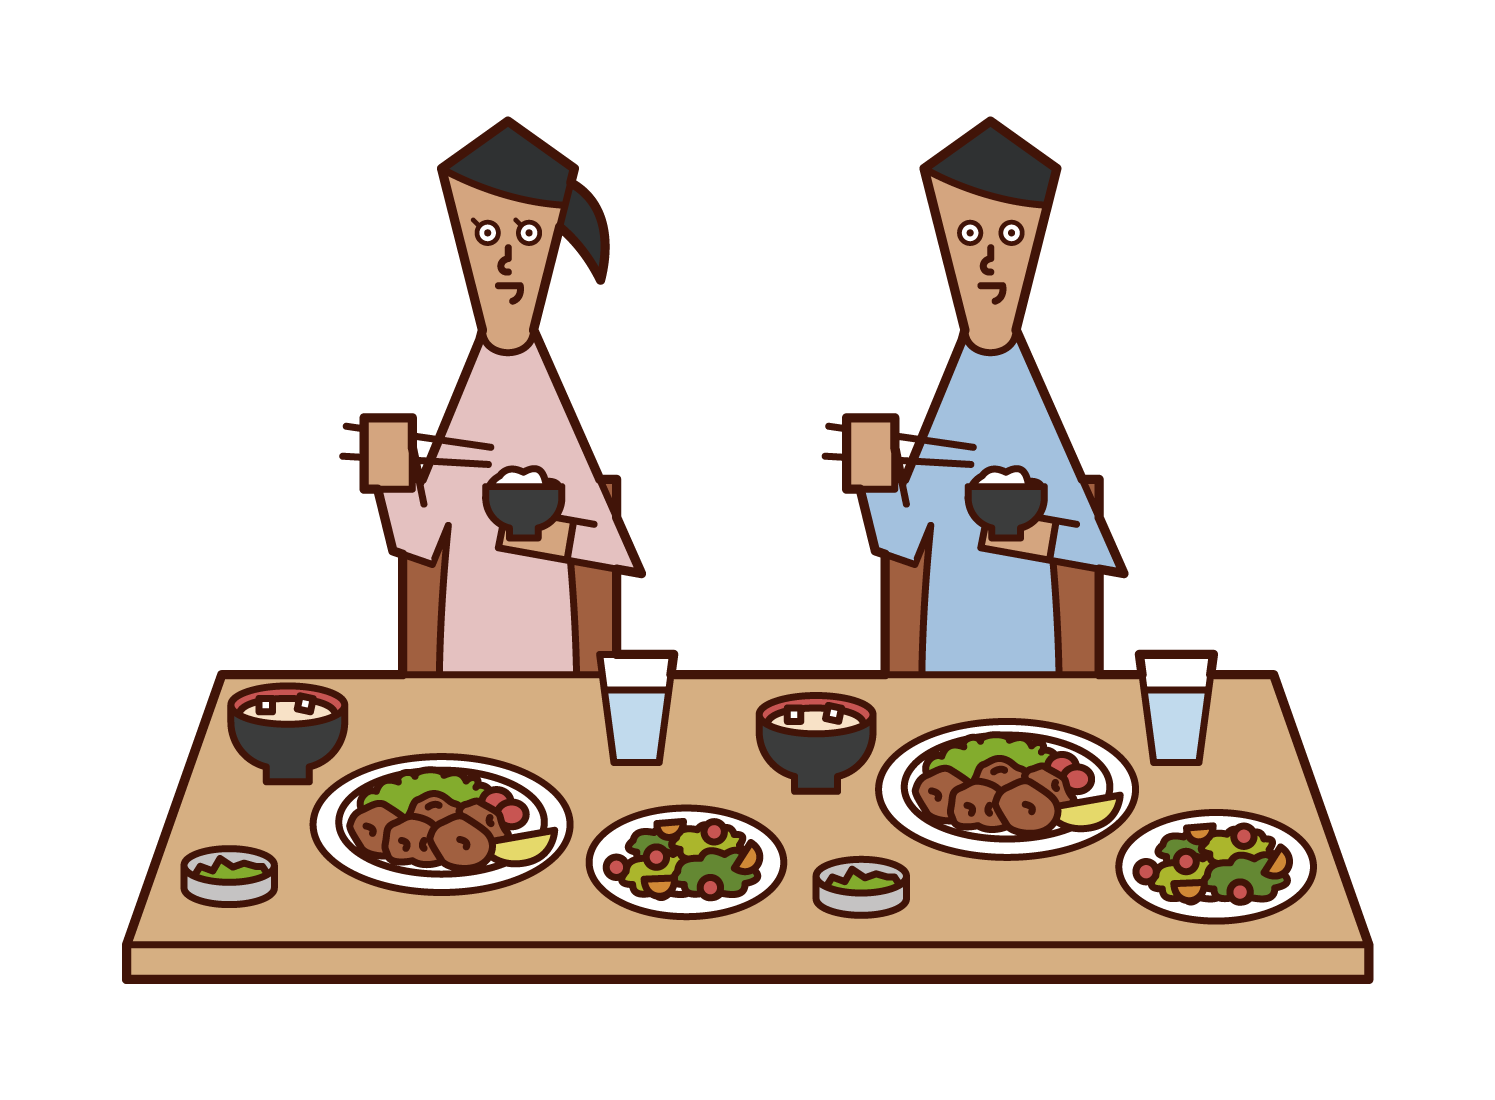 Illustrations of people (men and women) eating